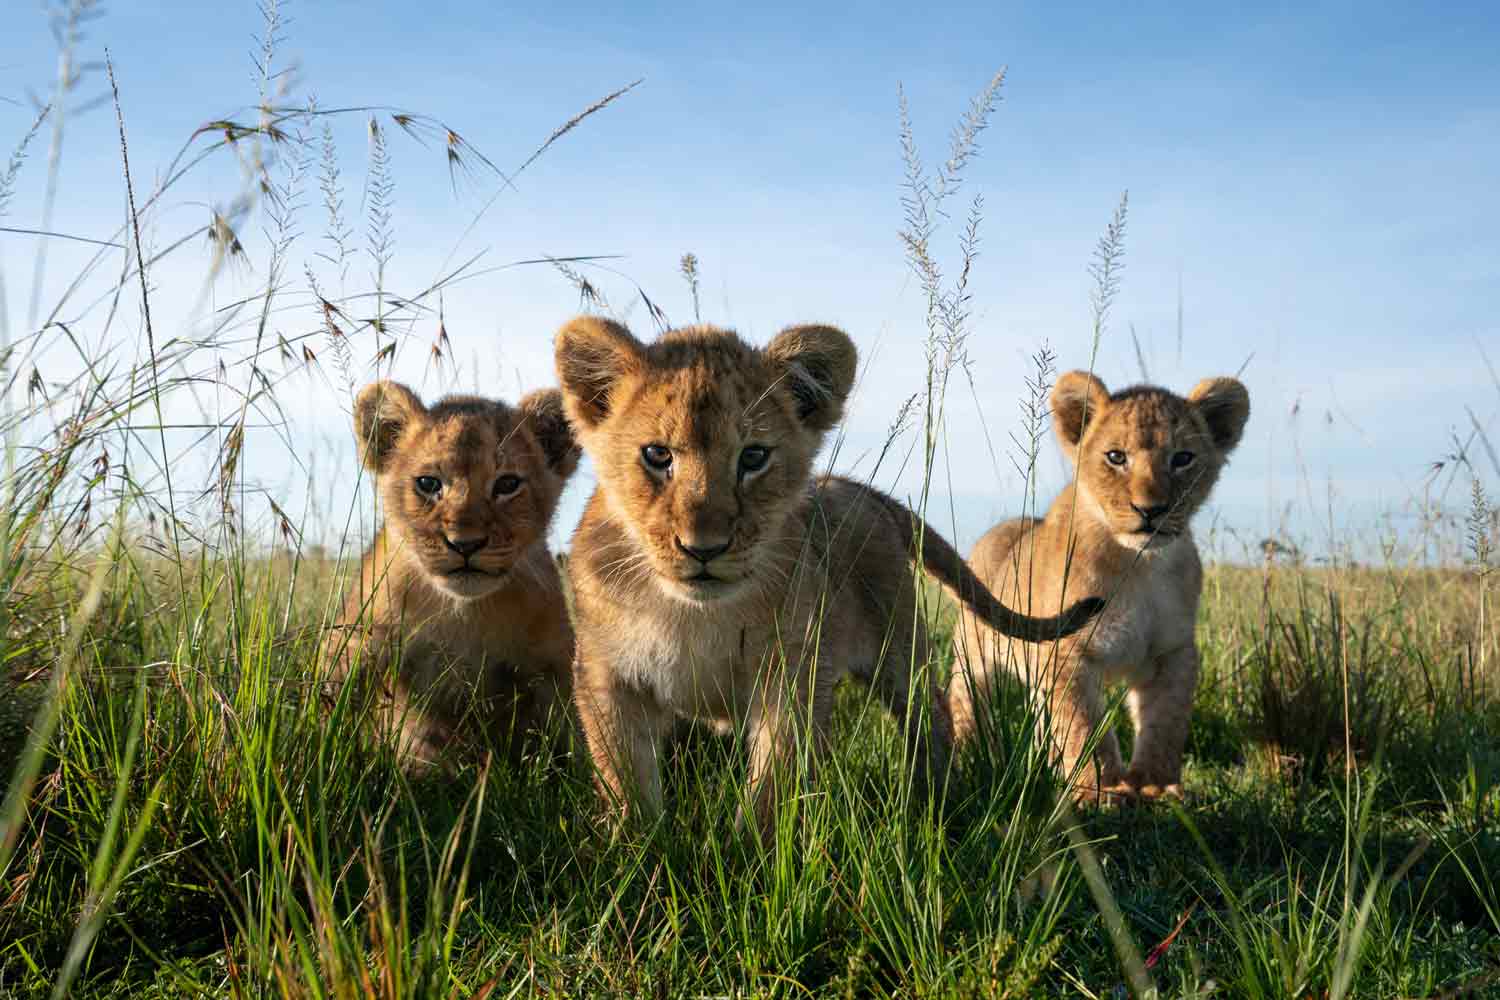 Three lion cubs stand in tall grass and look at the camera.